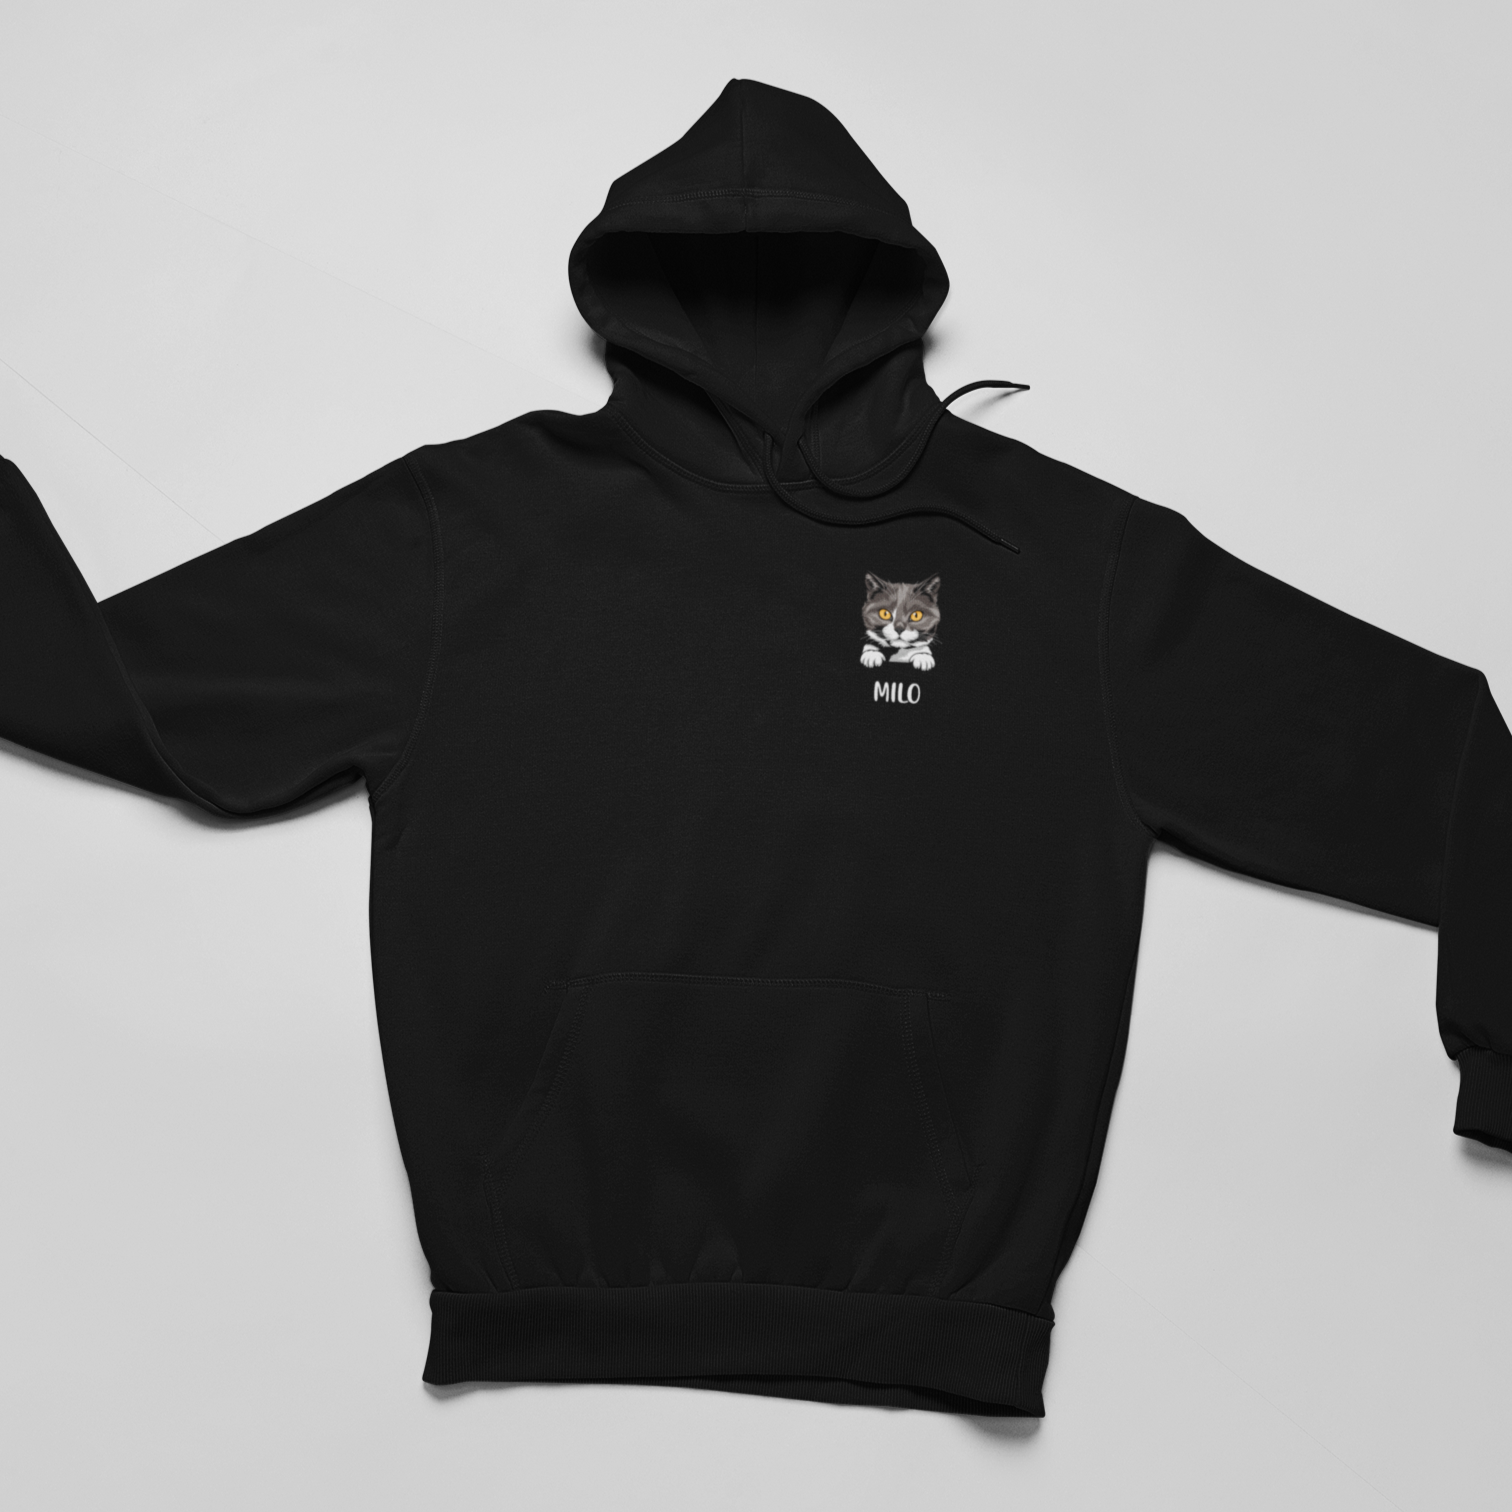 Image of a hoodie featuring a peeking cat head design with a personalized name below.